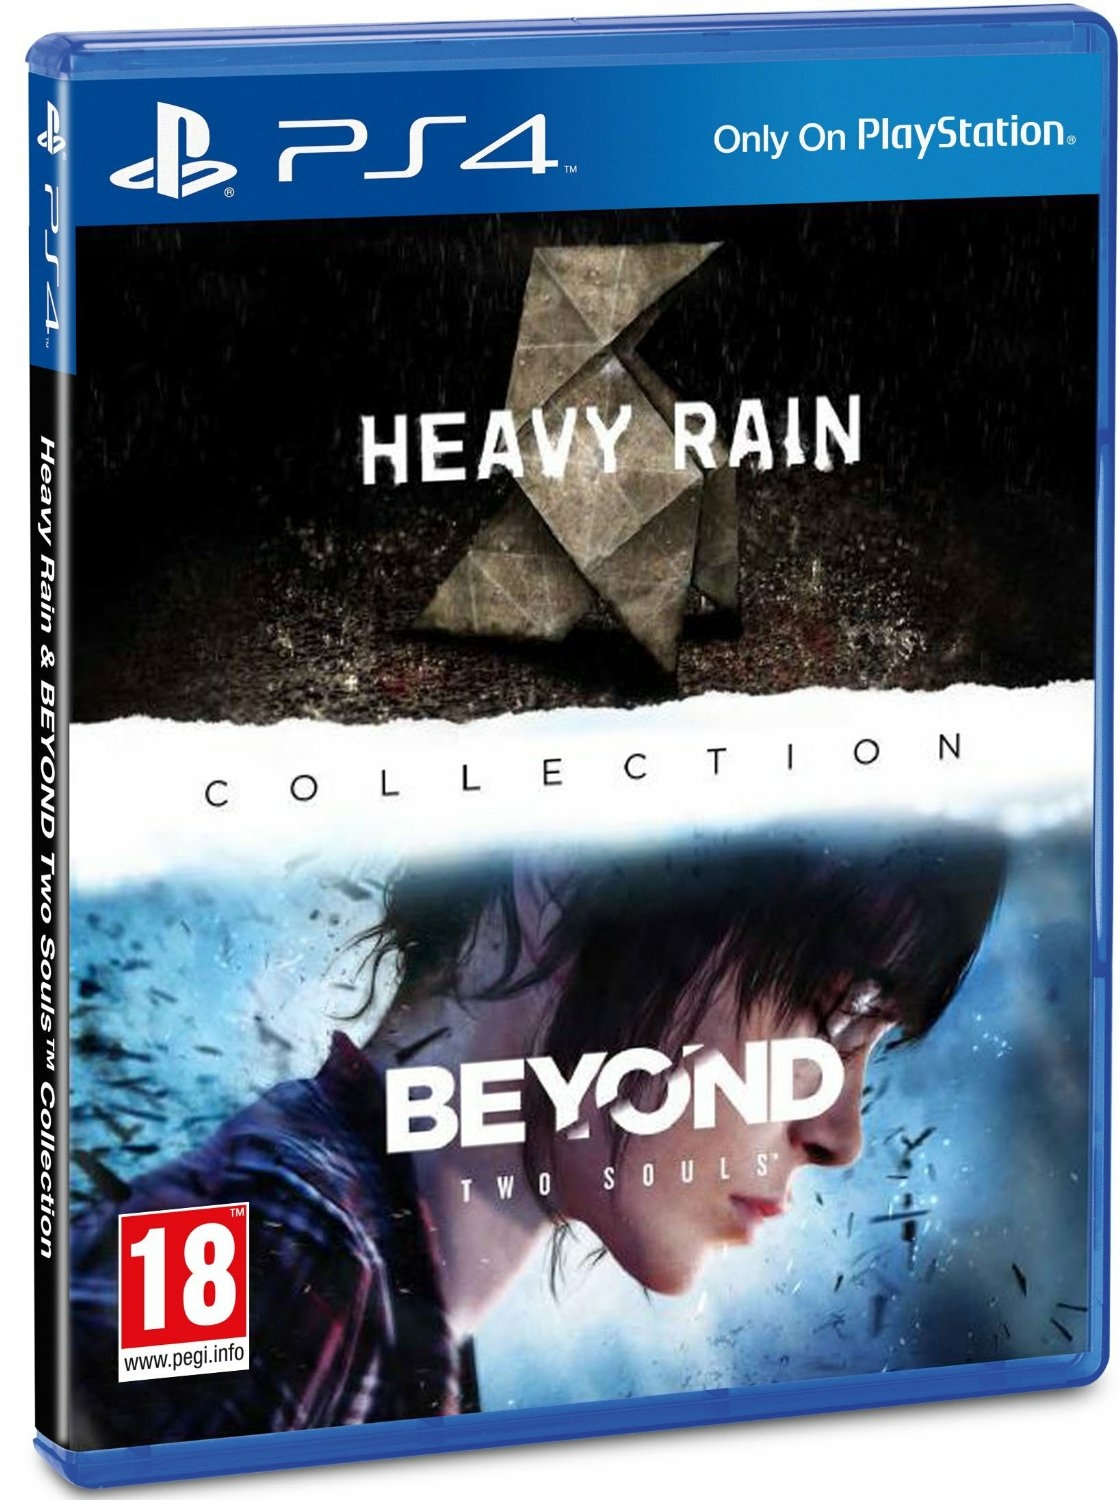 heavy rain and beyond two souls collection